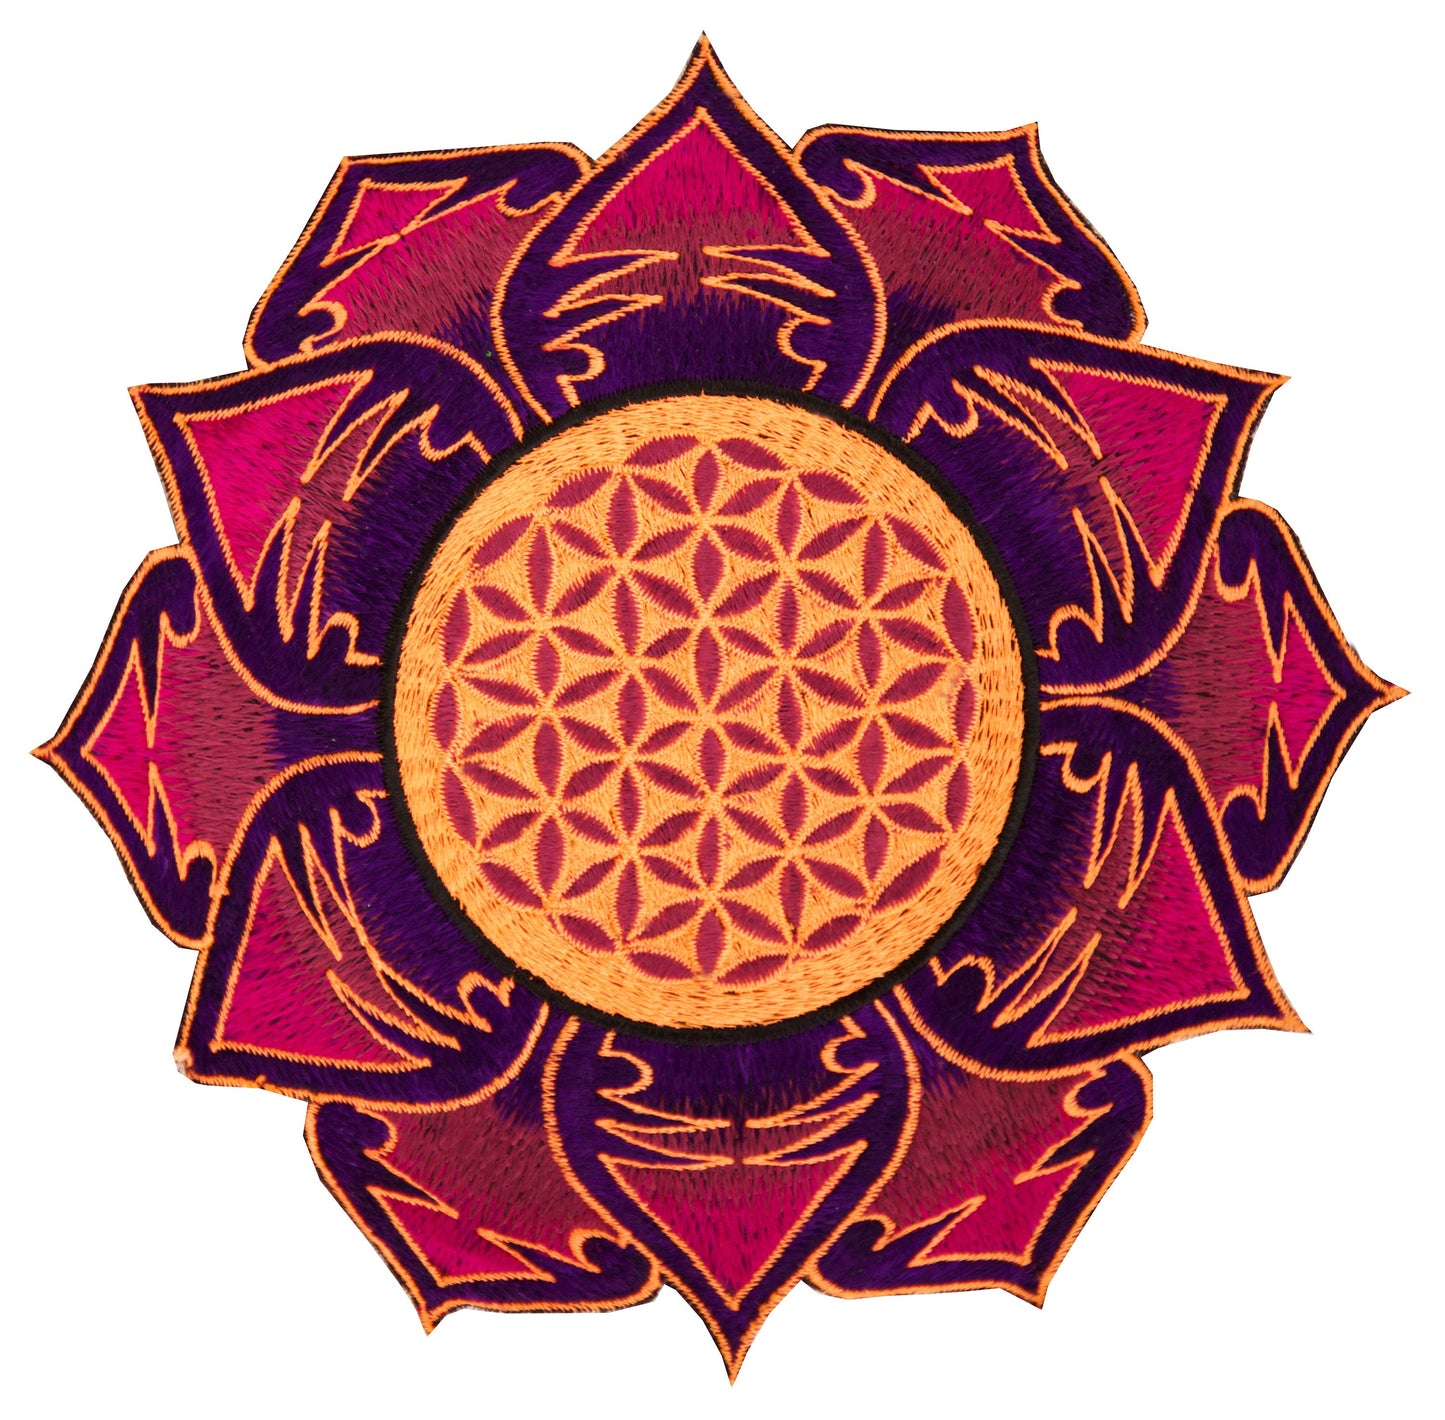 UV orange maroon Flower of Life embroidery for sew on - holy geometry sacred blacklight glowing patch